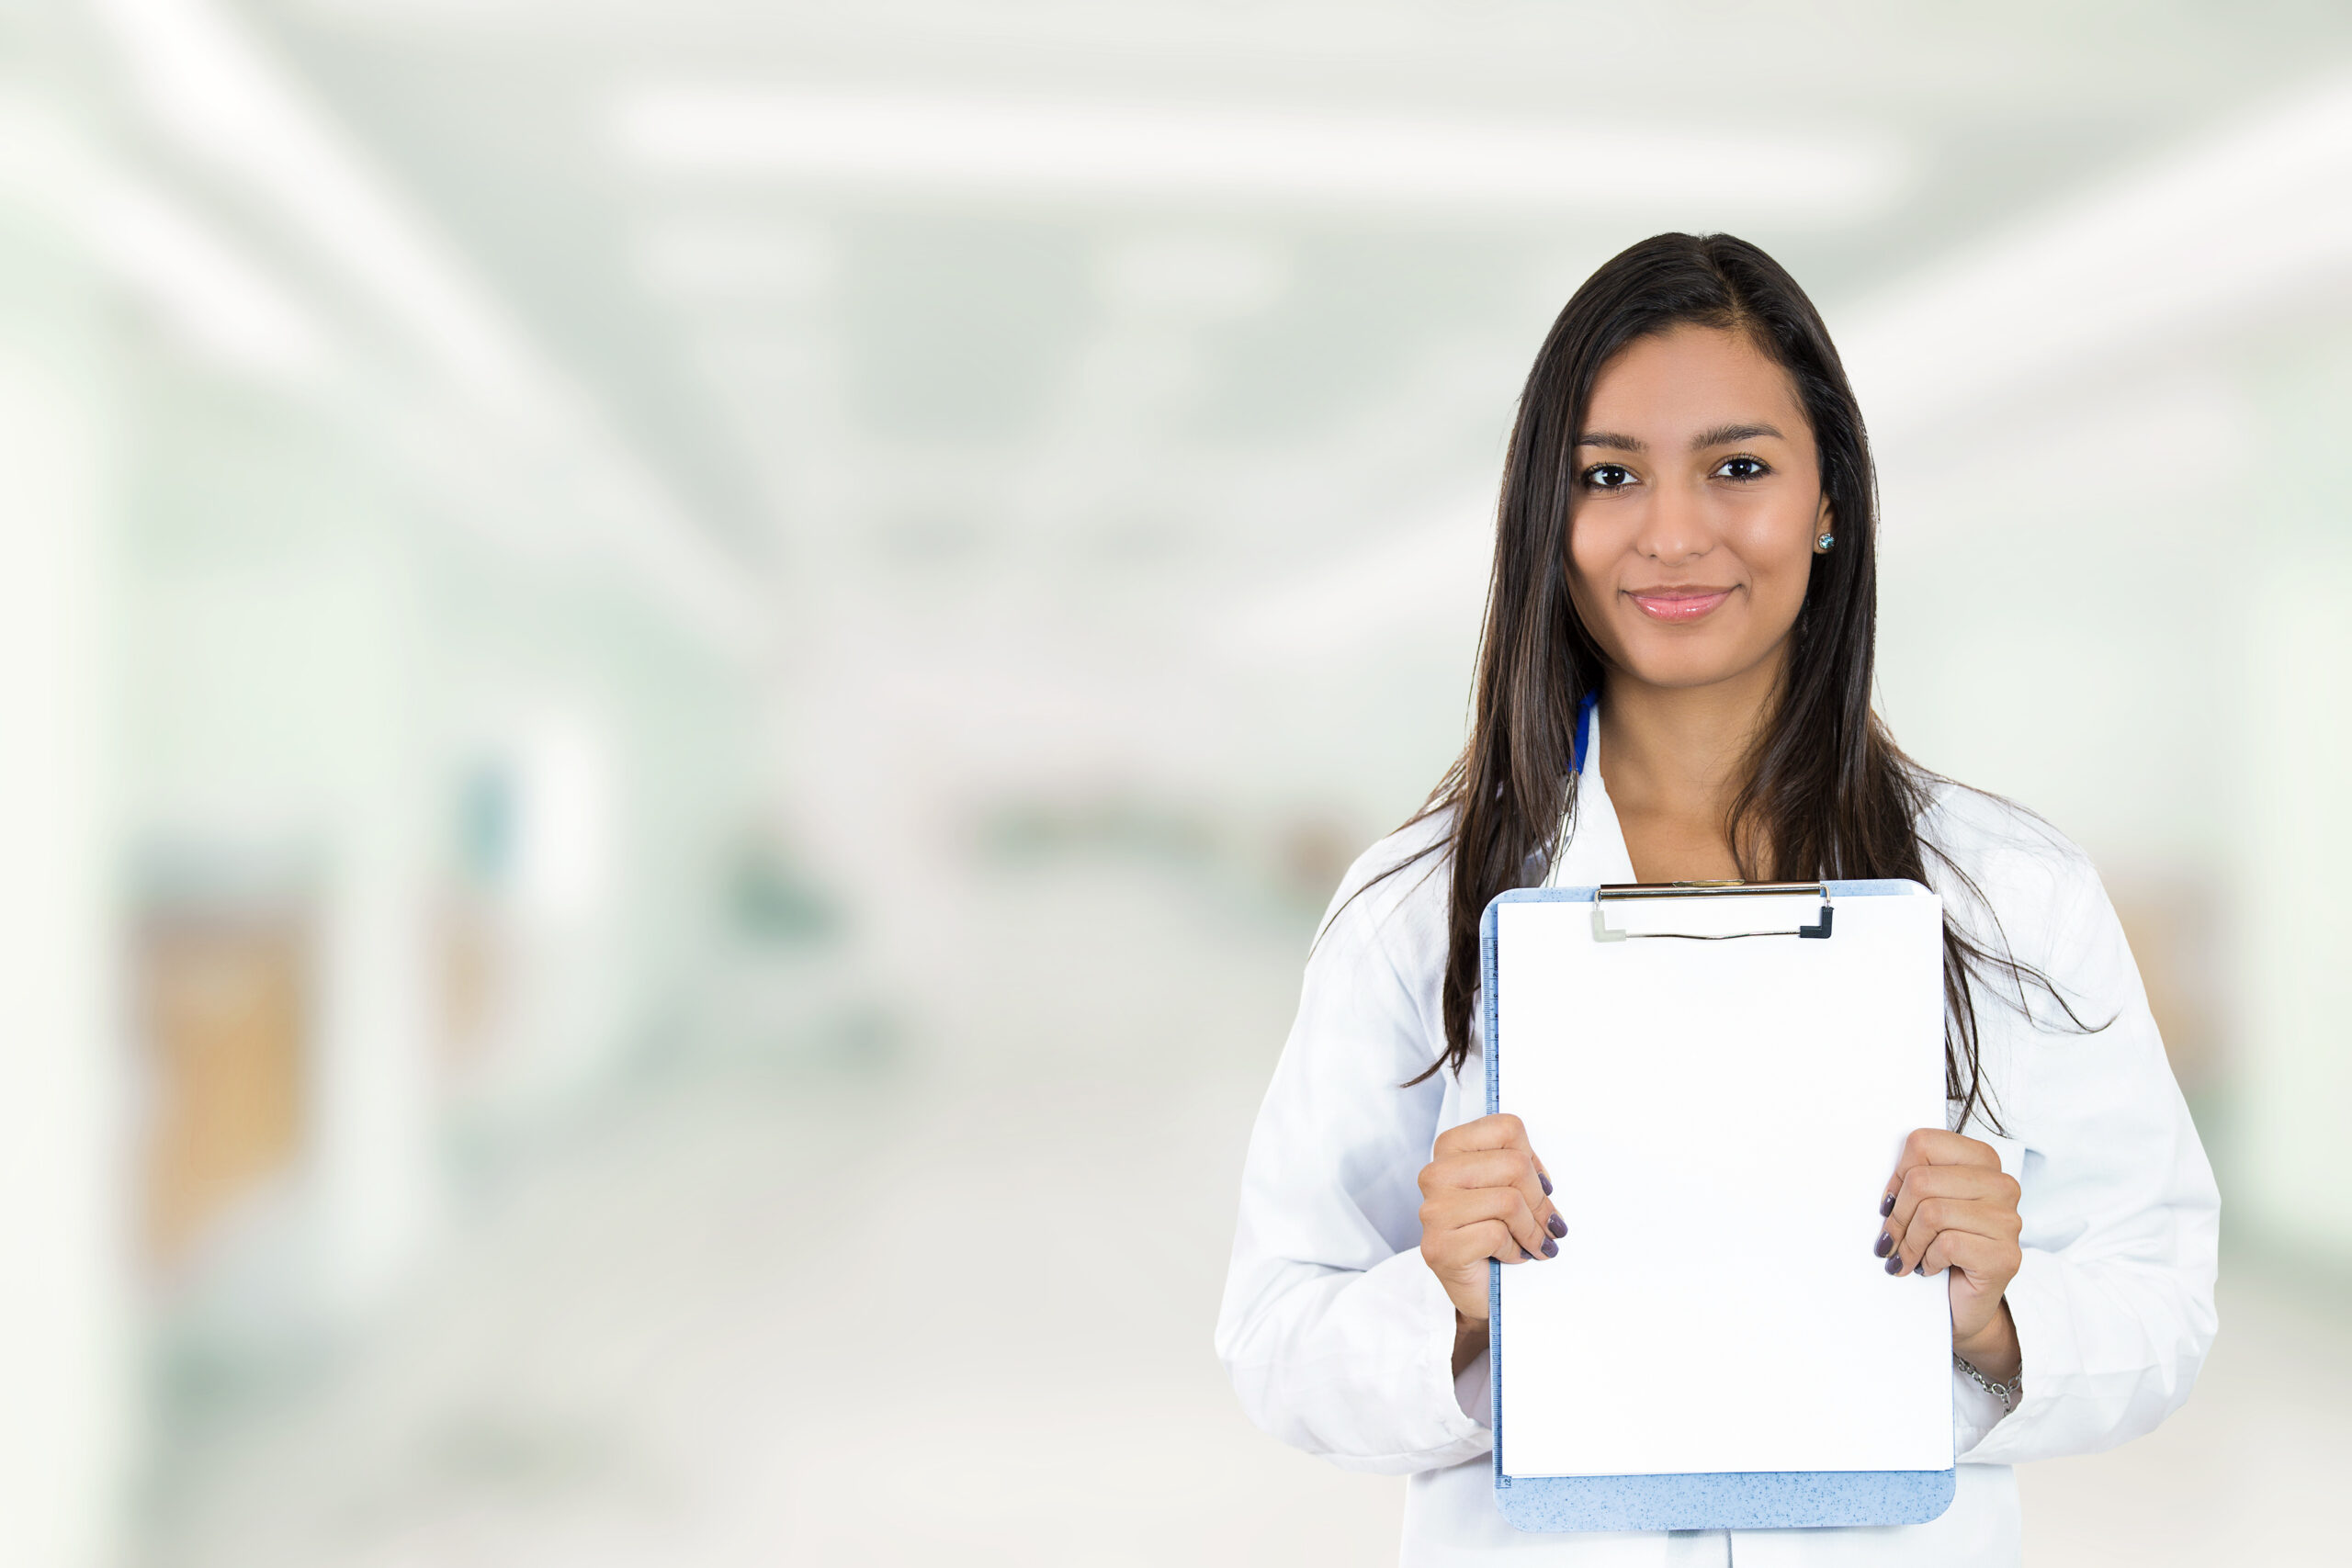 Happy smiling doctor holding clipboard standing in hospital hallway isolated on clinic windows background